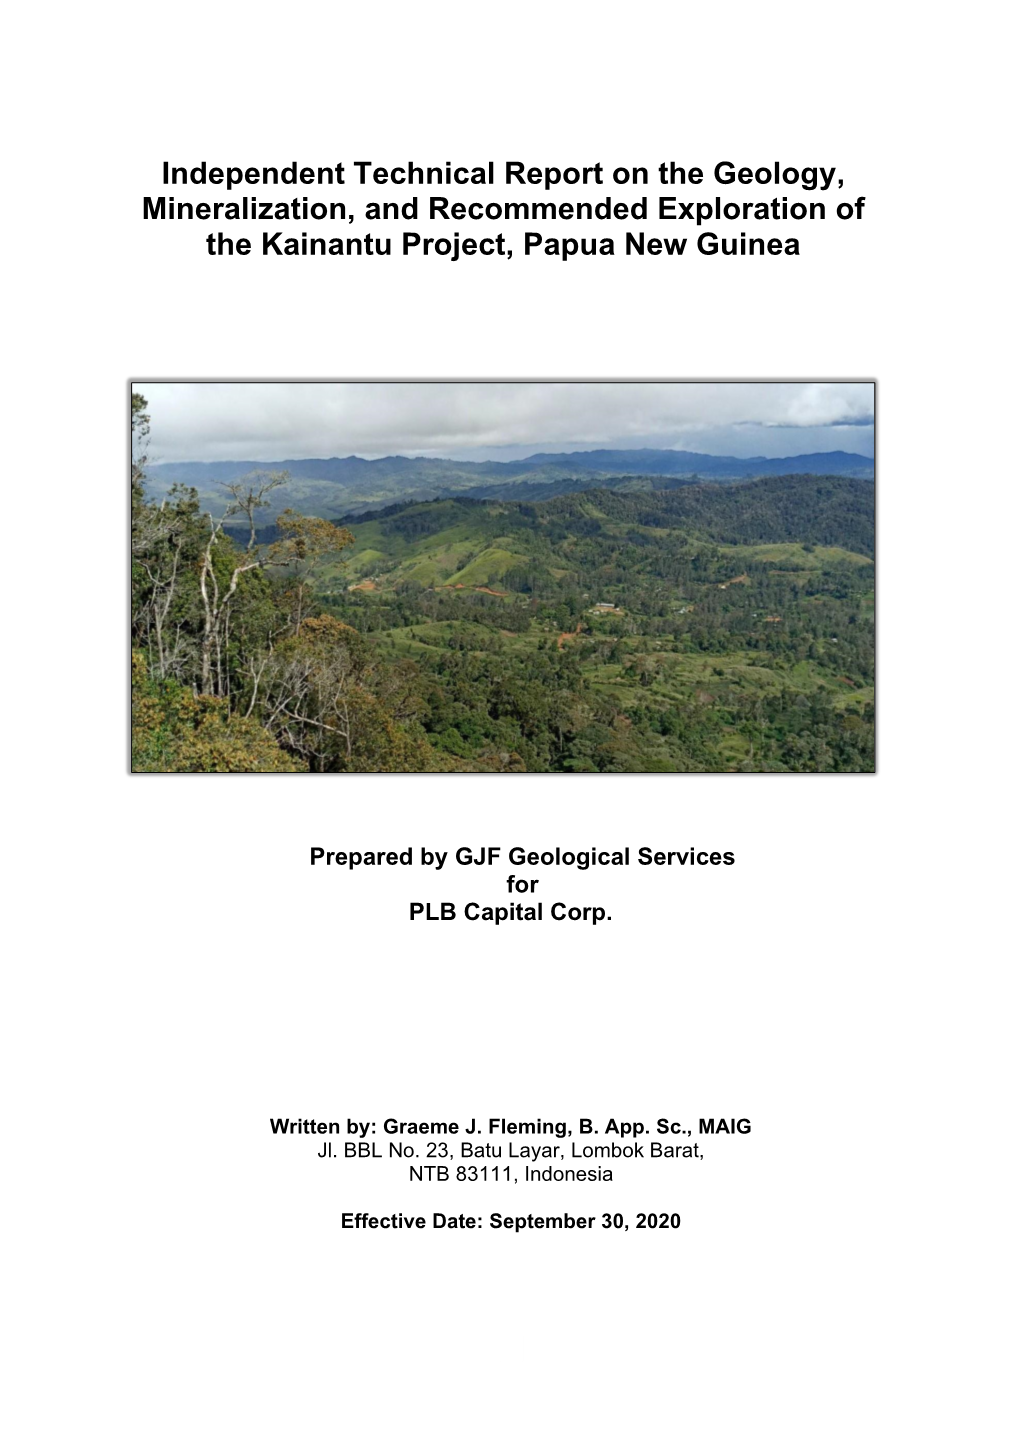 Independent Technical Report on the Geology, Mineralization, and Recommended Exploration of the Kainantu Project, Papua New Guinea